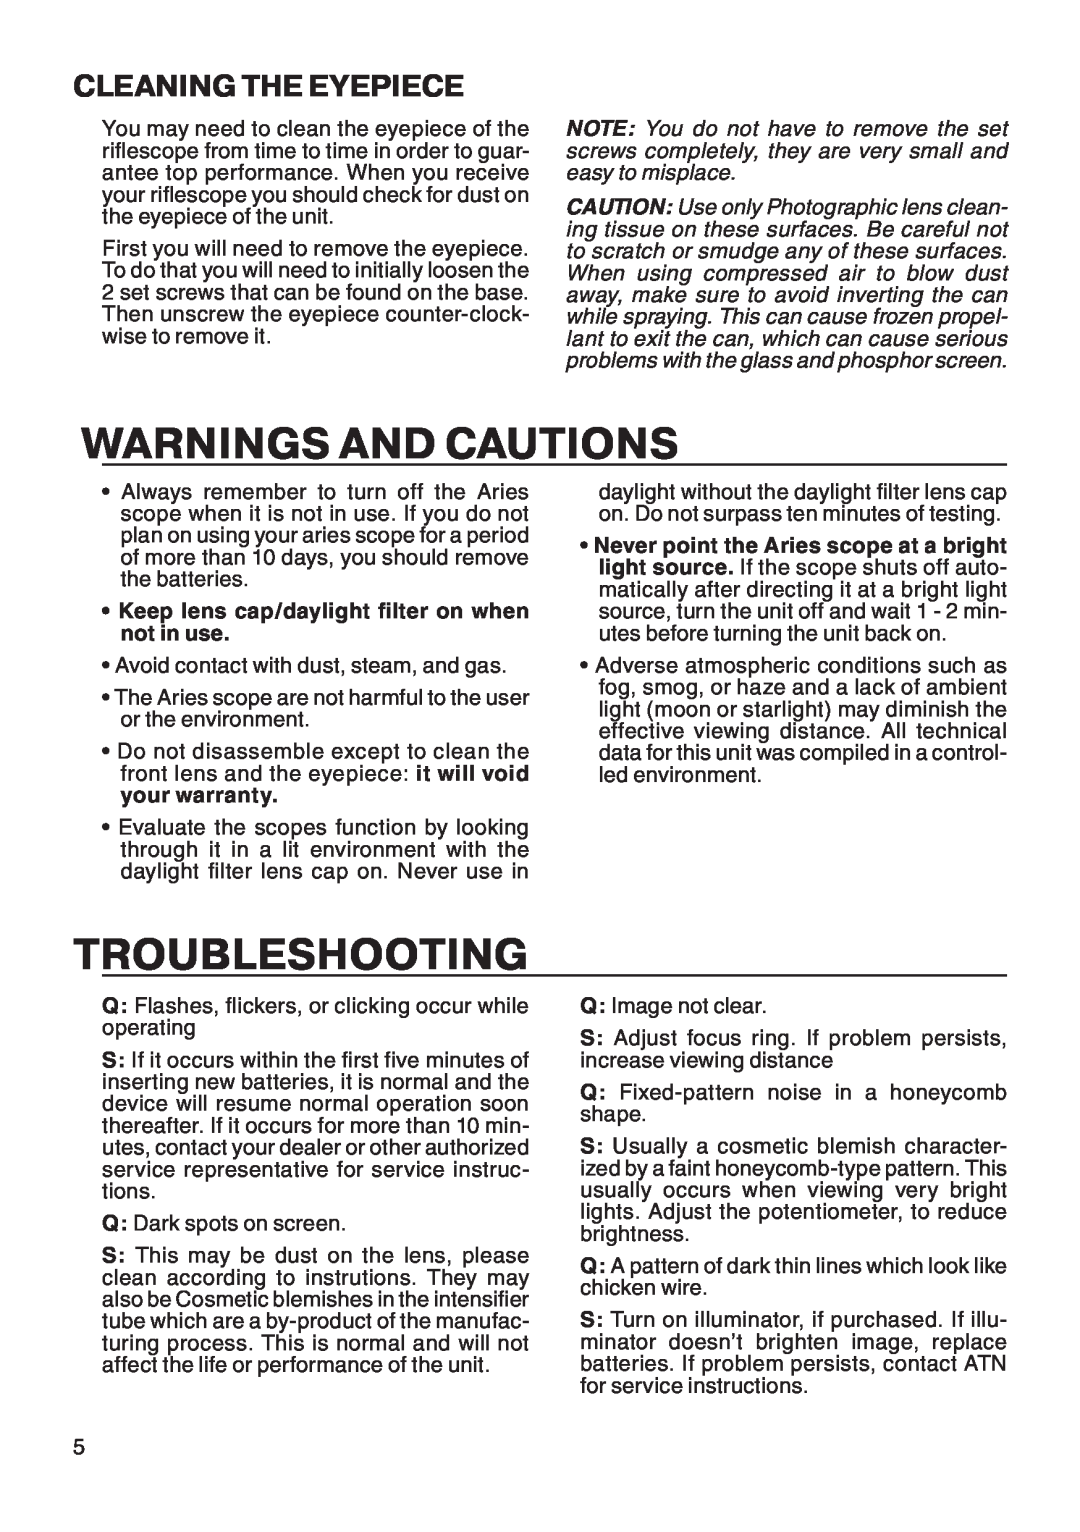 ATN ATN Aries 7900 manual Warnings And Cautions, Troubleshooting, Cleaning The Eyepiece 